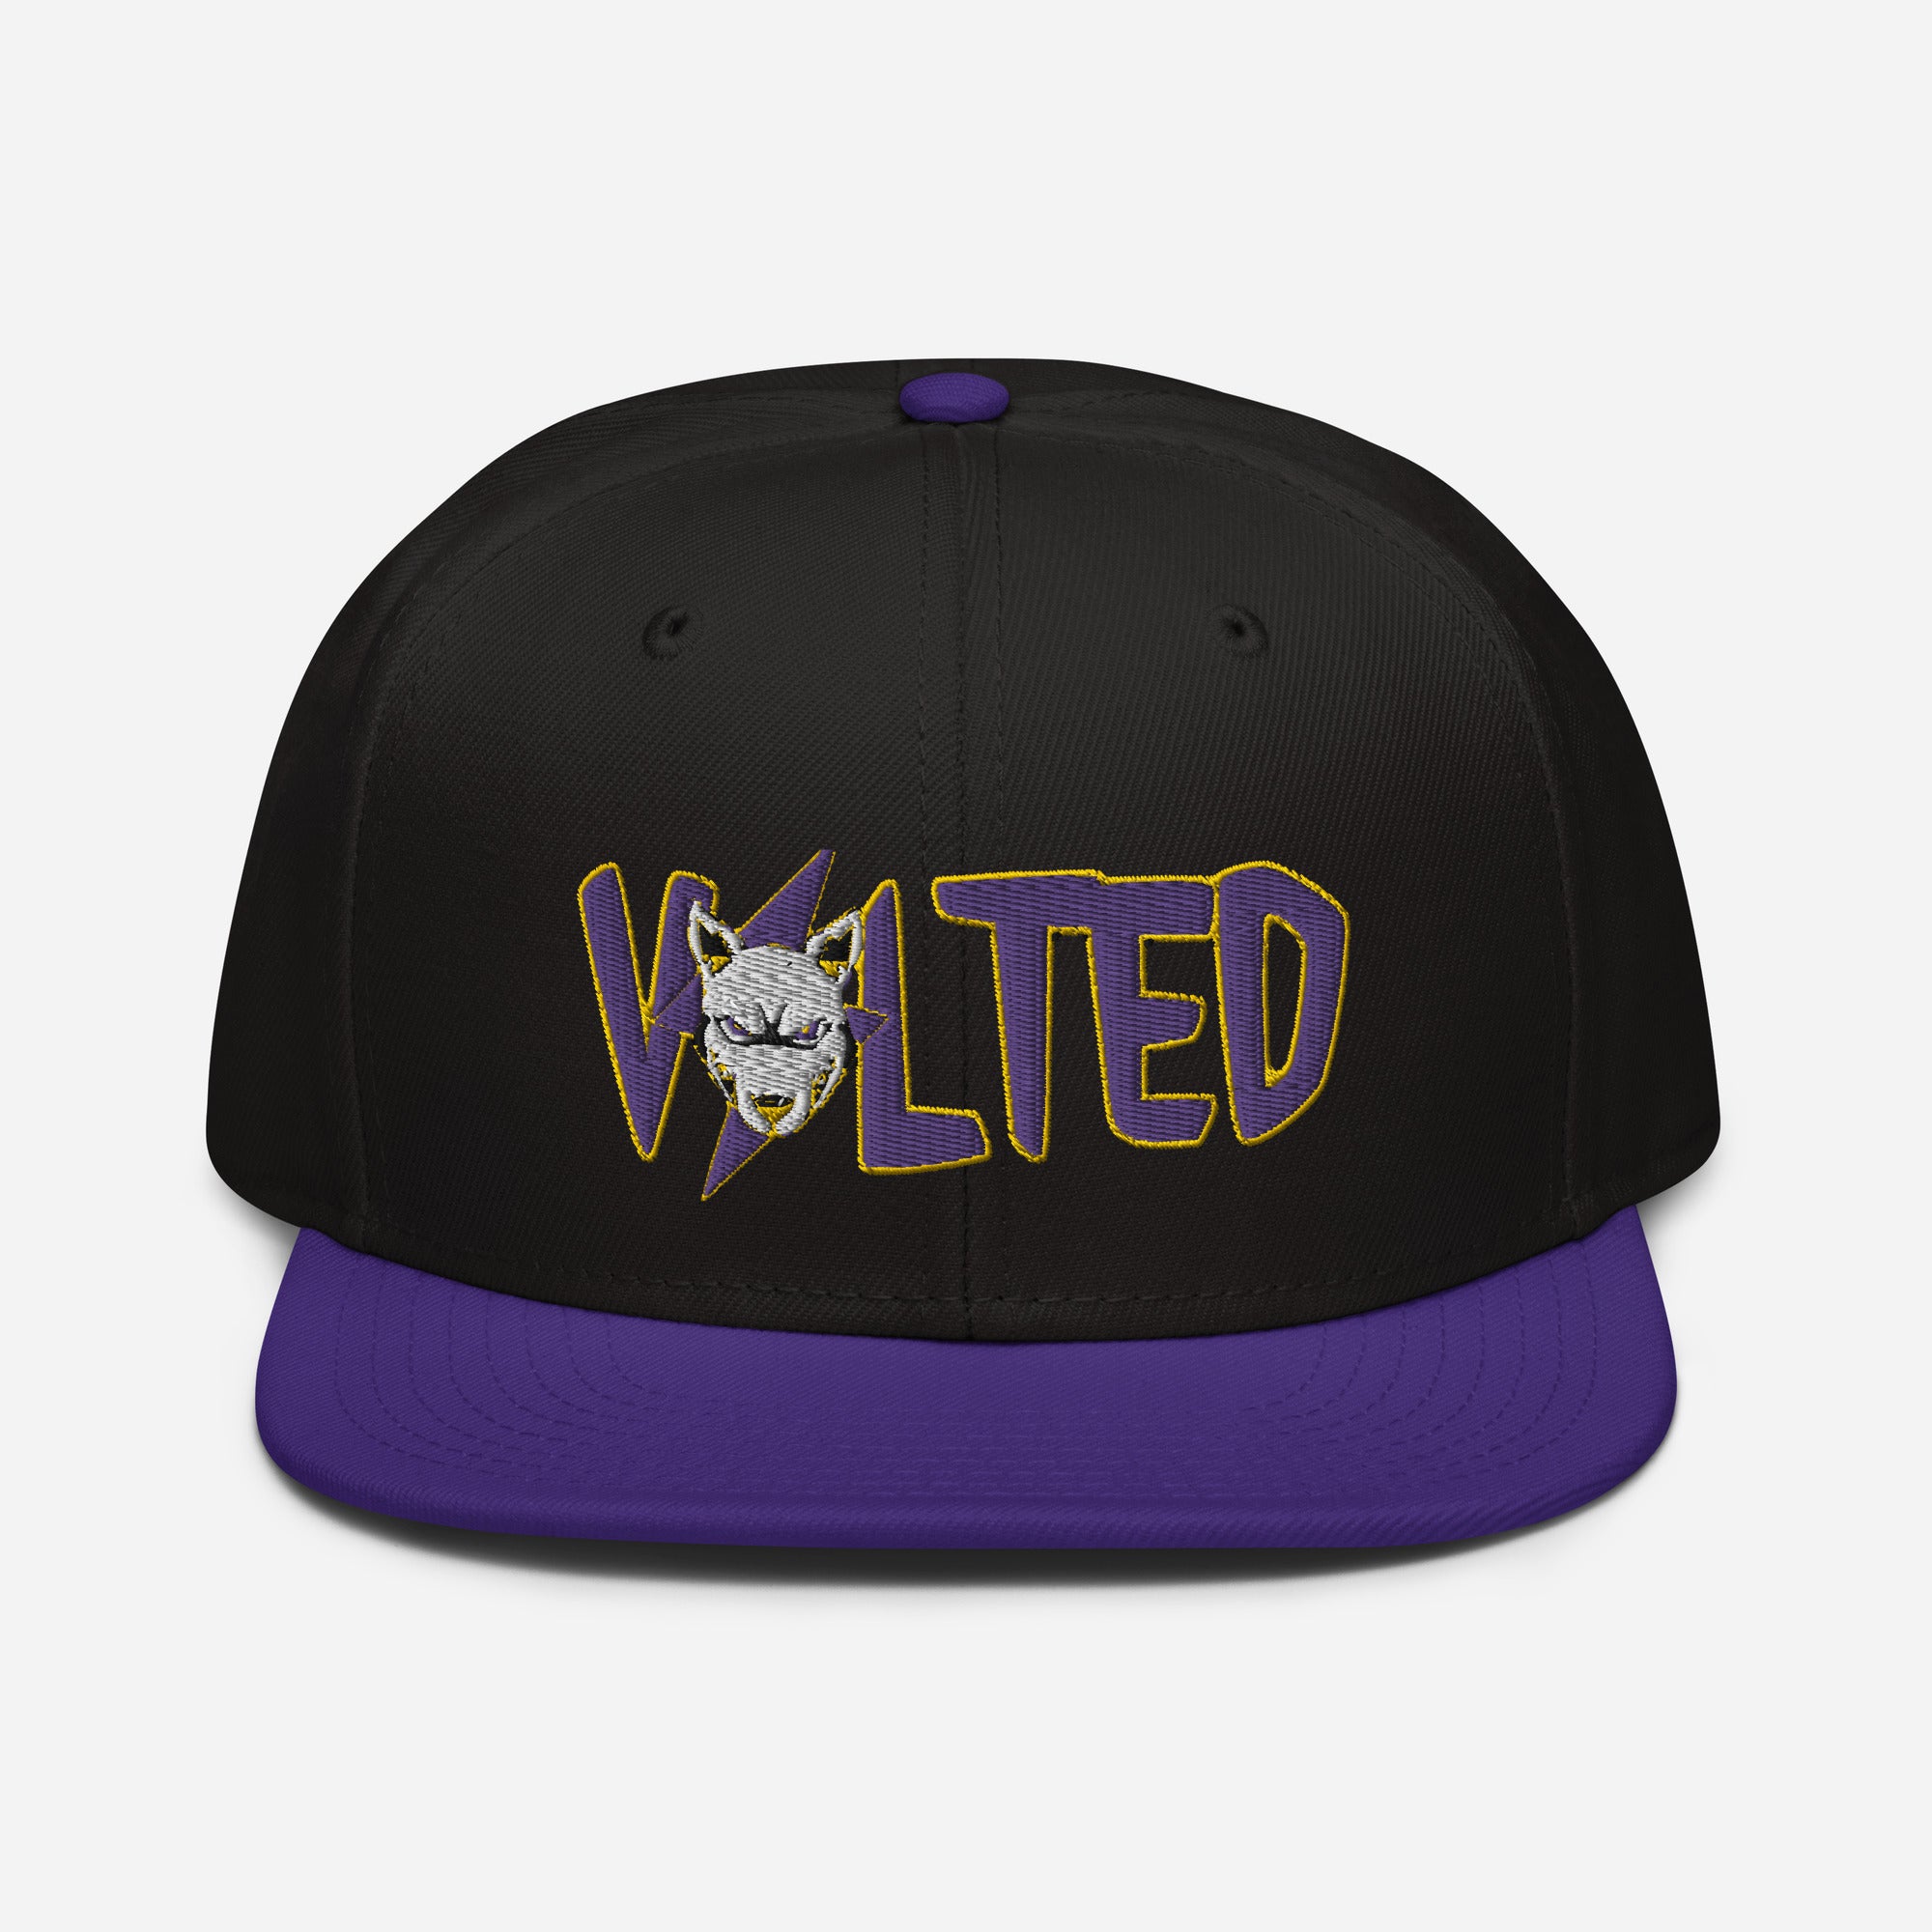 Volted Gold n Purp Snapback